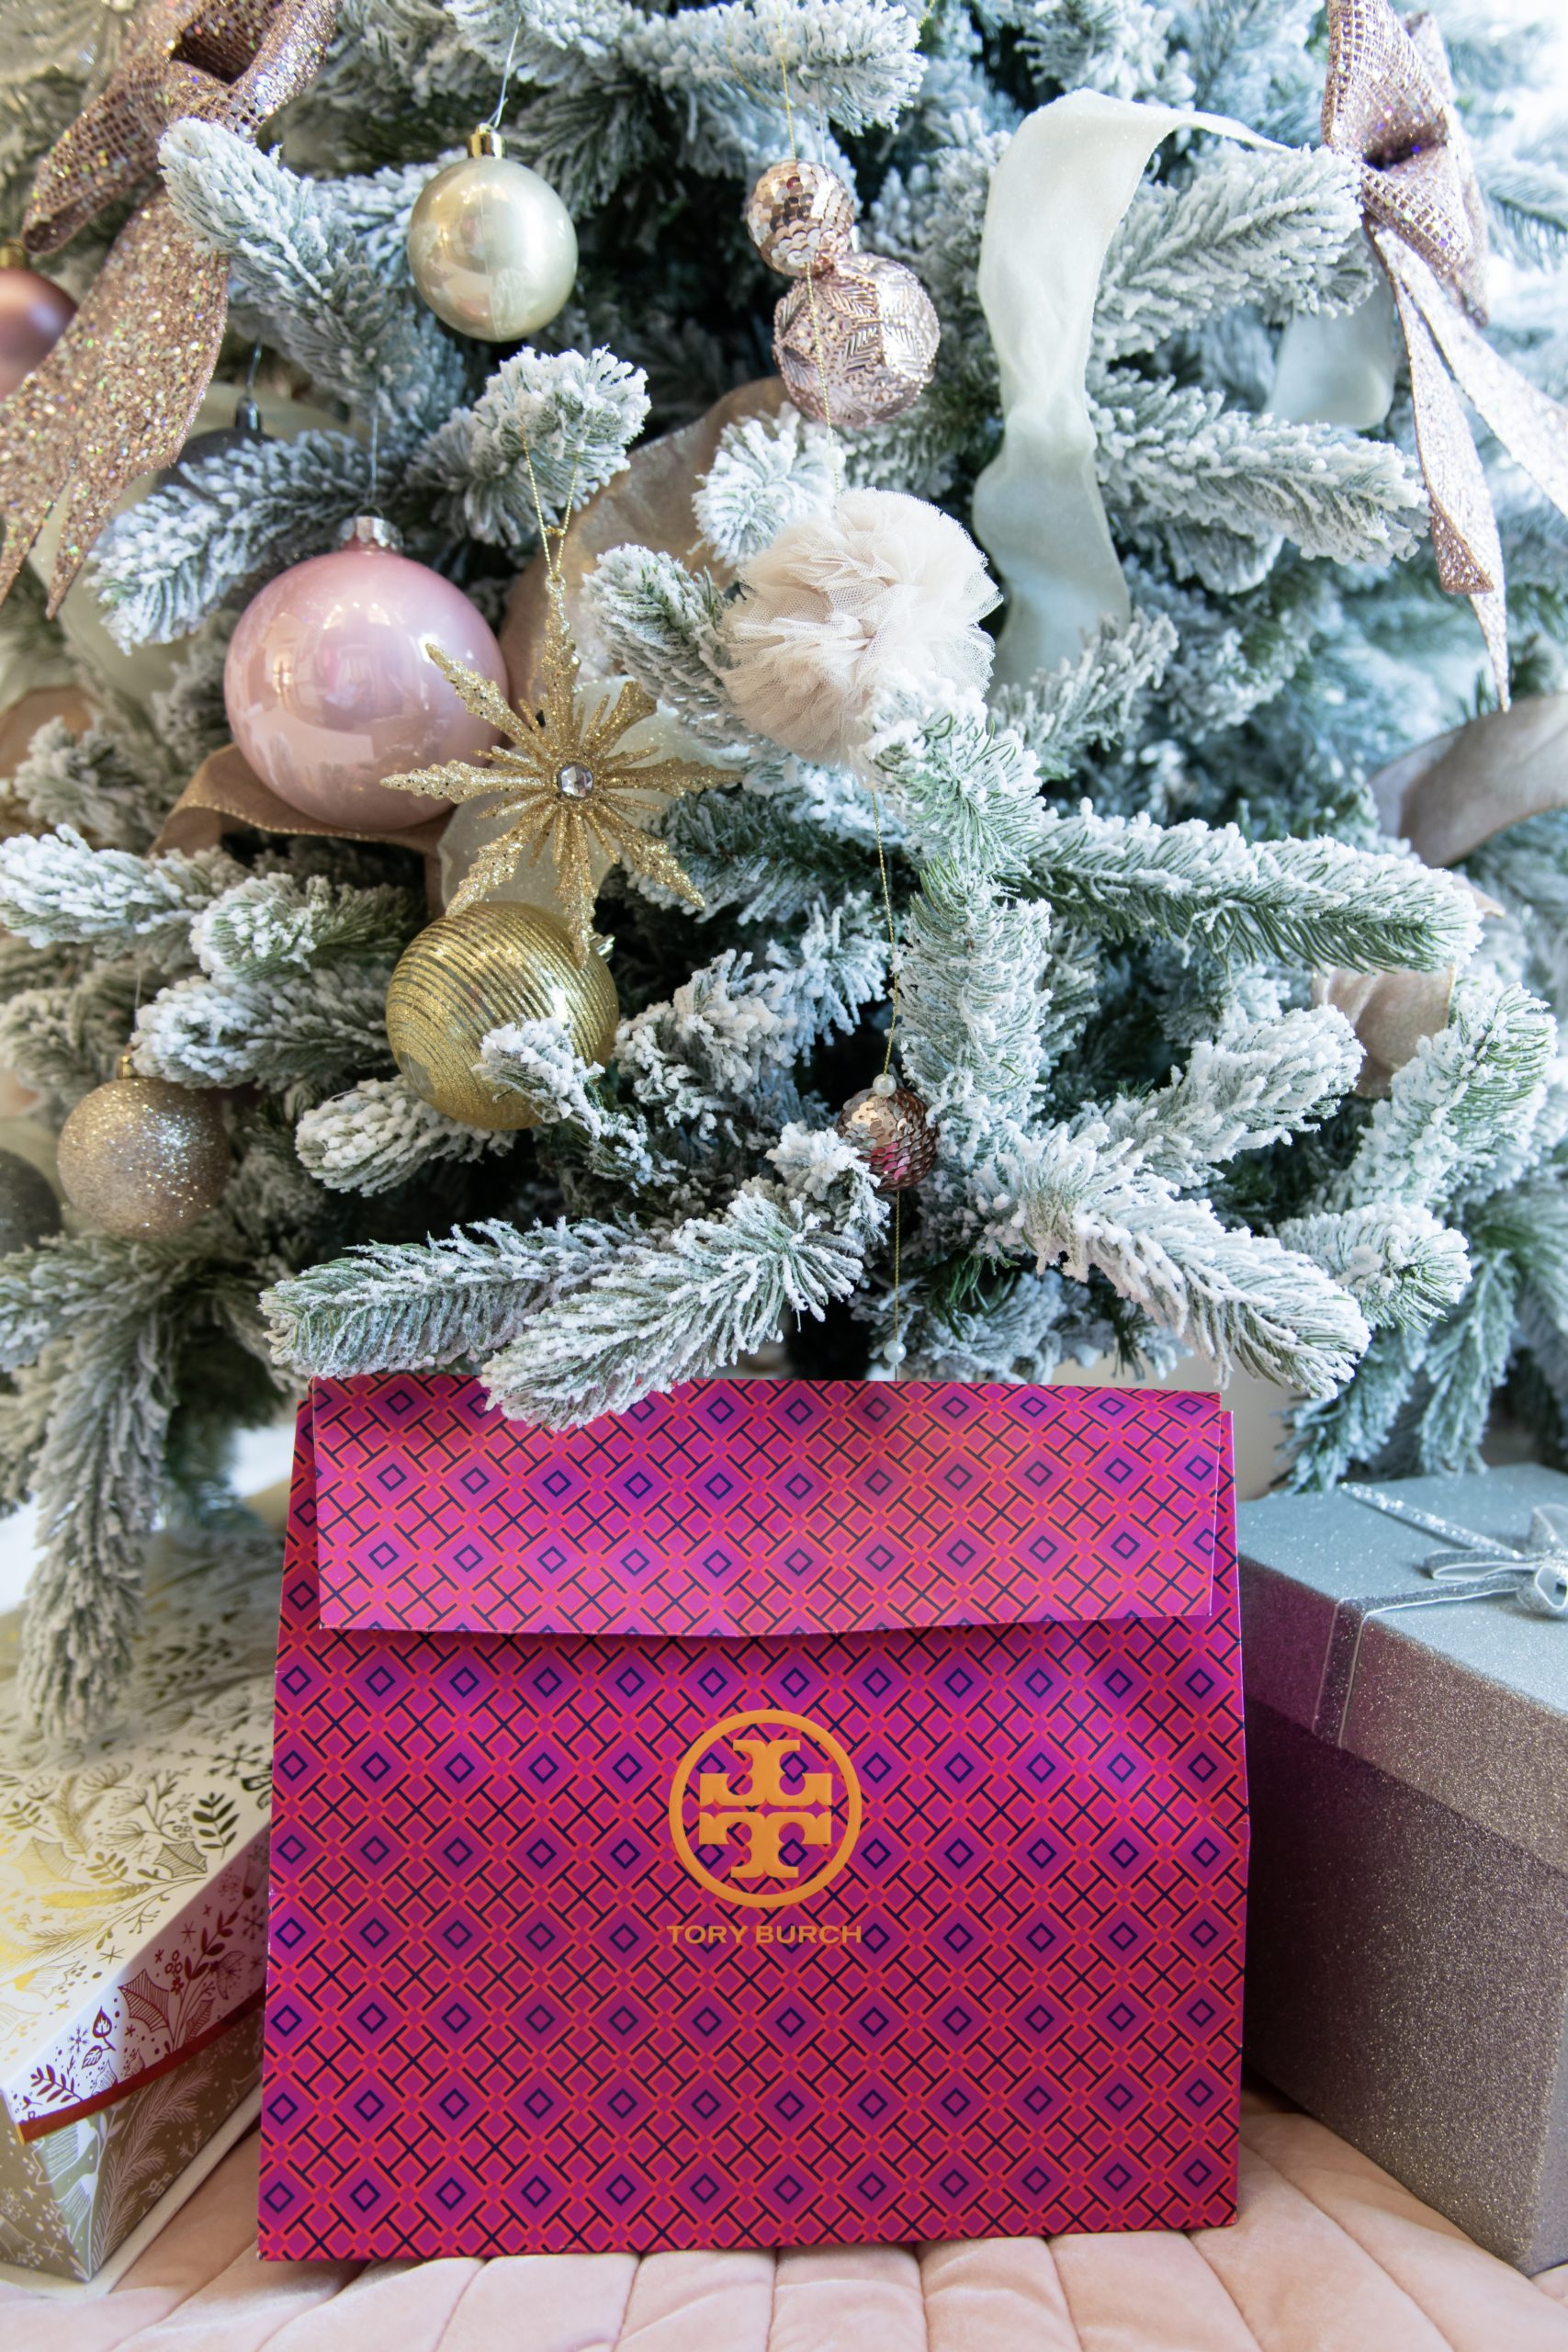 Tory Burch Semi-Annual Sale December 2022! - The Double Take Girls